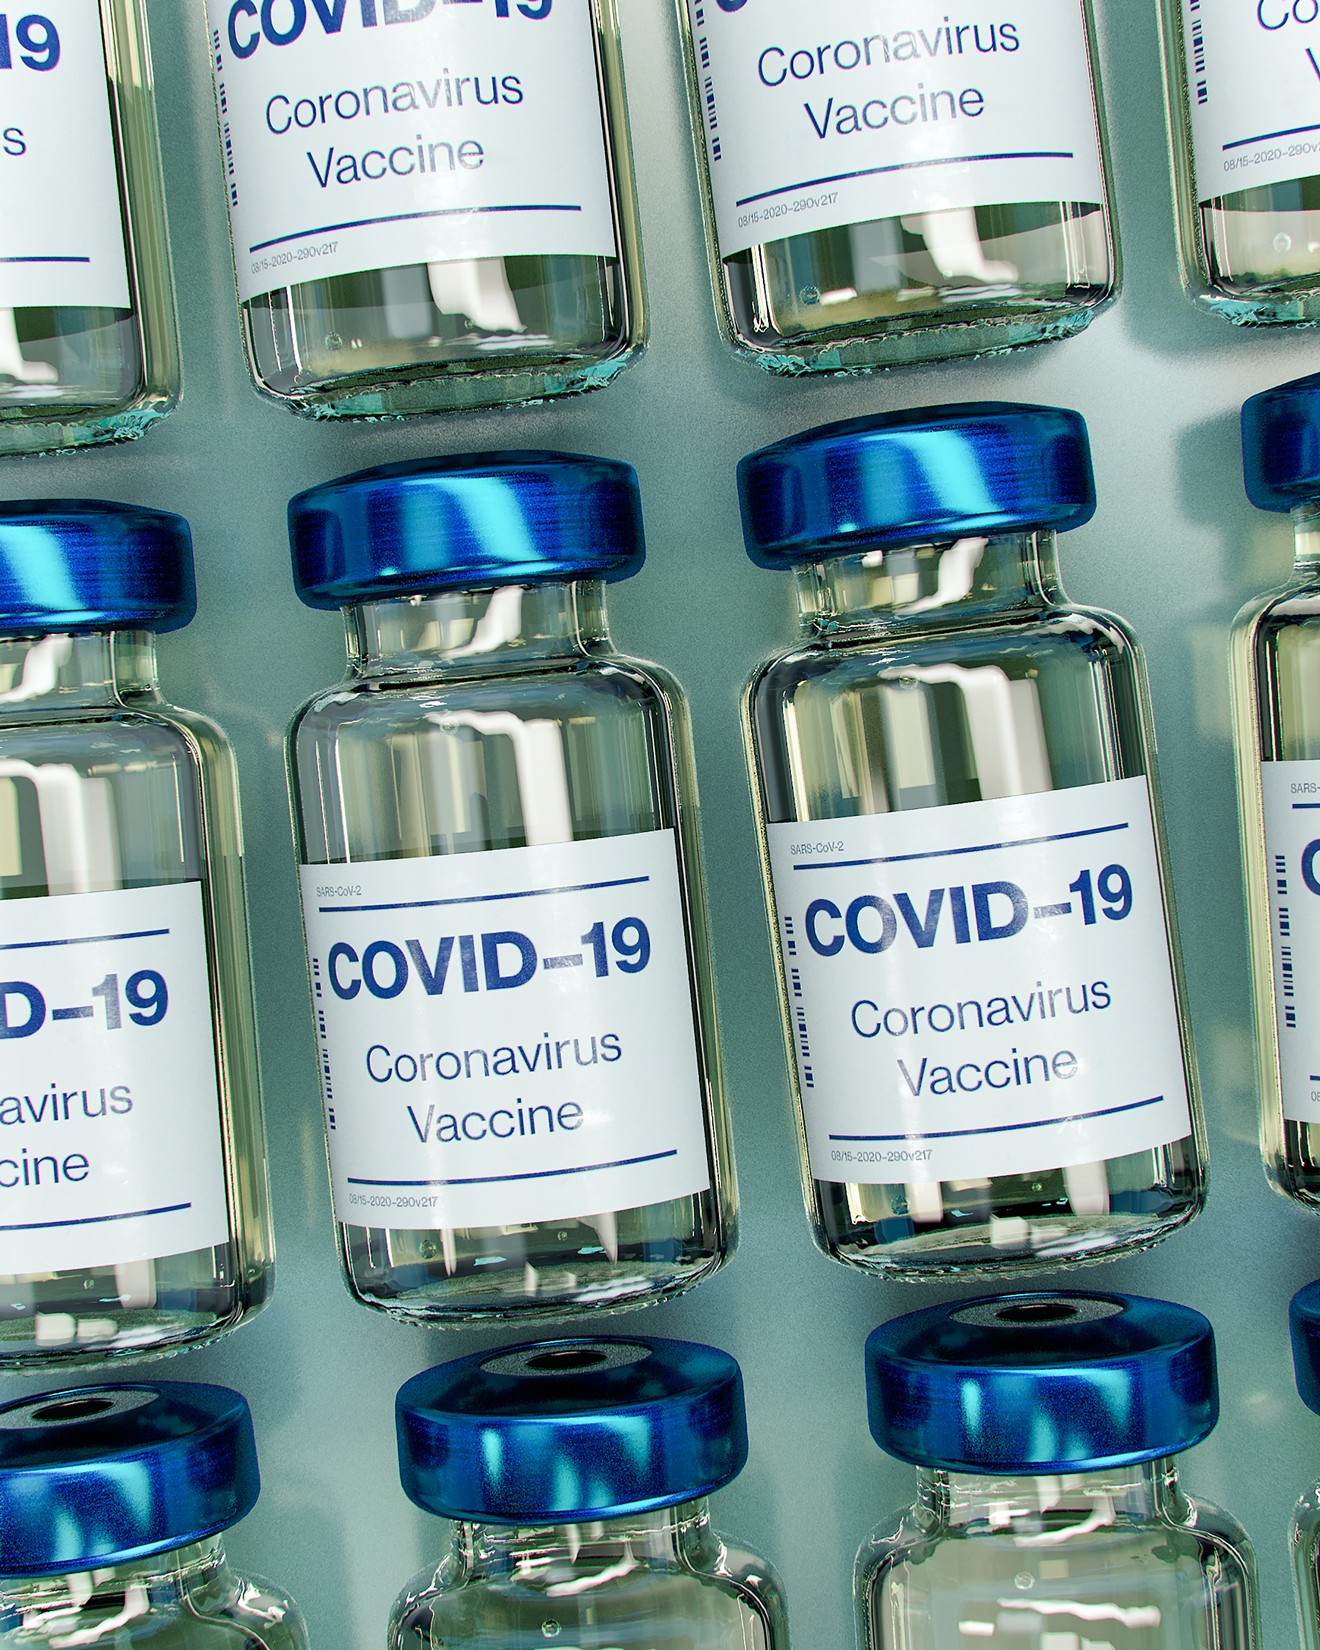 The omicron variant makes up most of the new COVID-19 cases in Texas, according to state health authorities.